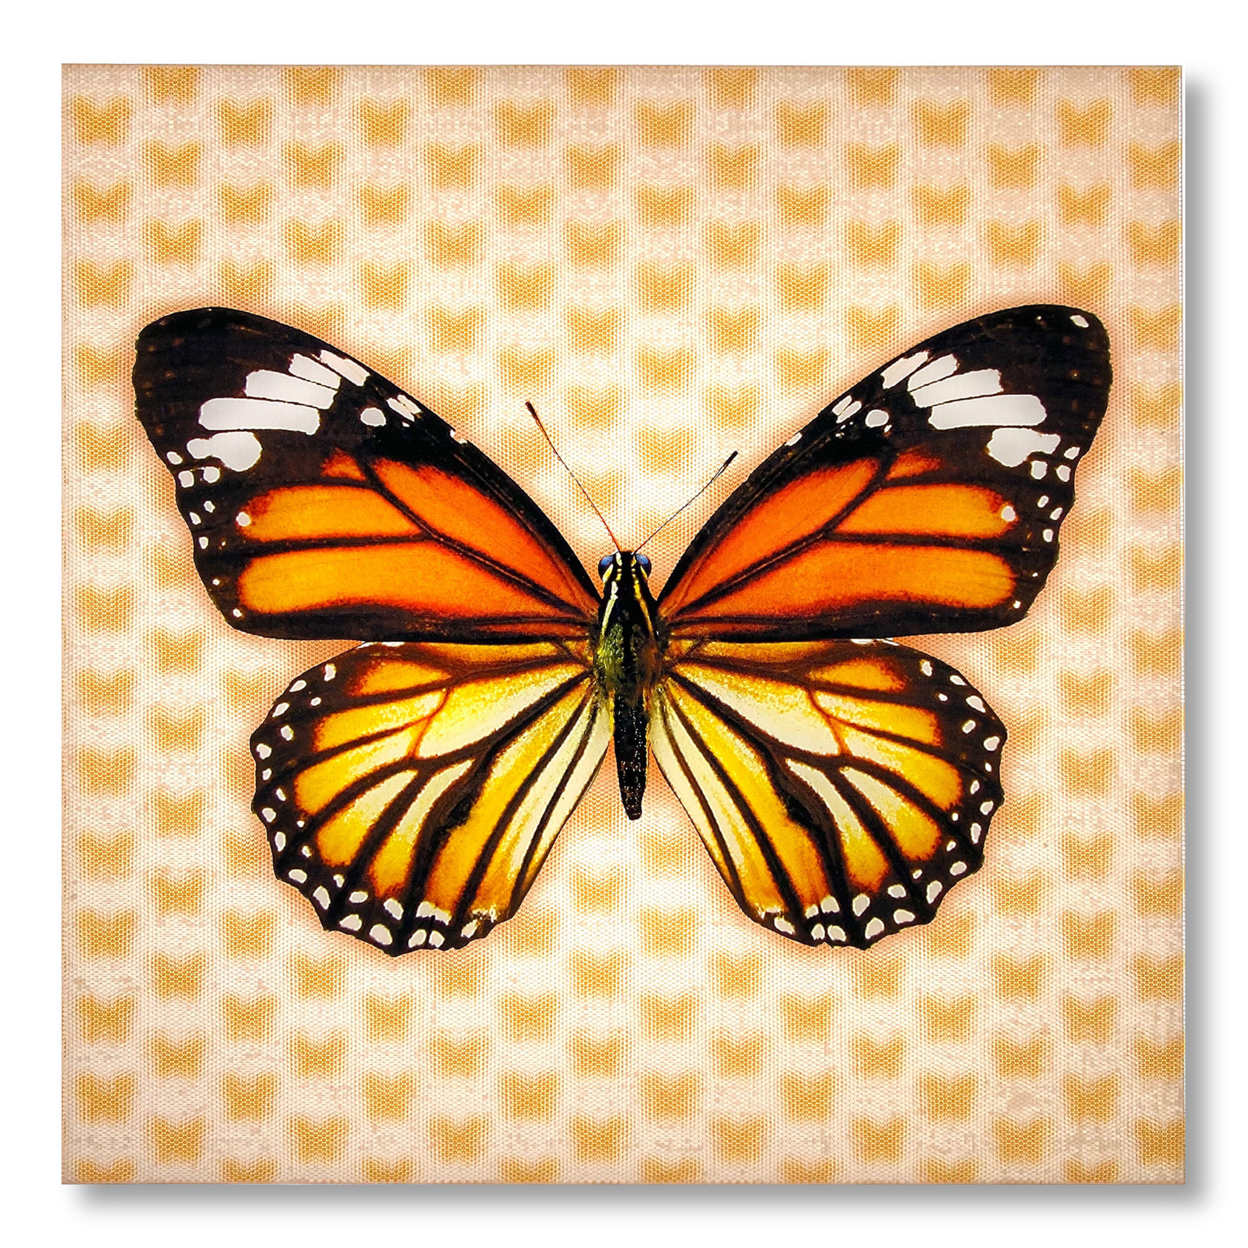 5D Multi-Dimensional Monrach Butterfly Wall Art Print On Strong Polycarbonate Panel With Vibrant Colors For Living Room By Matashi (6x6 In)